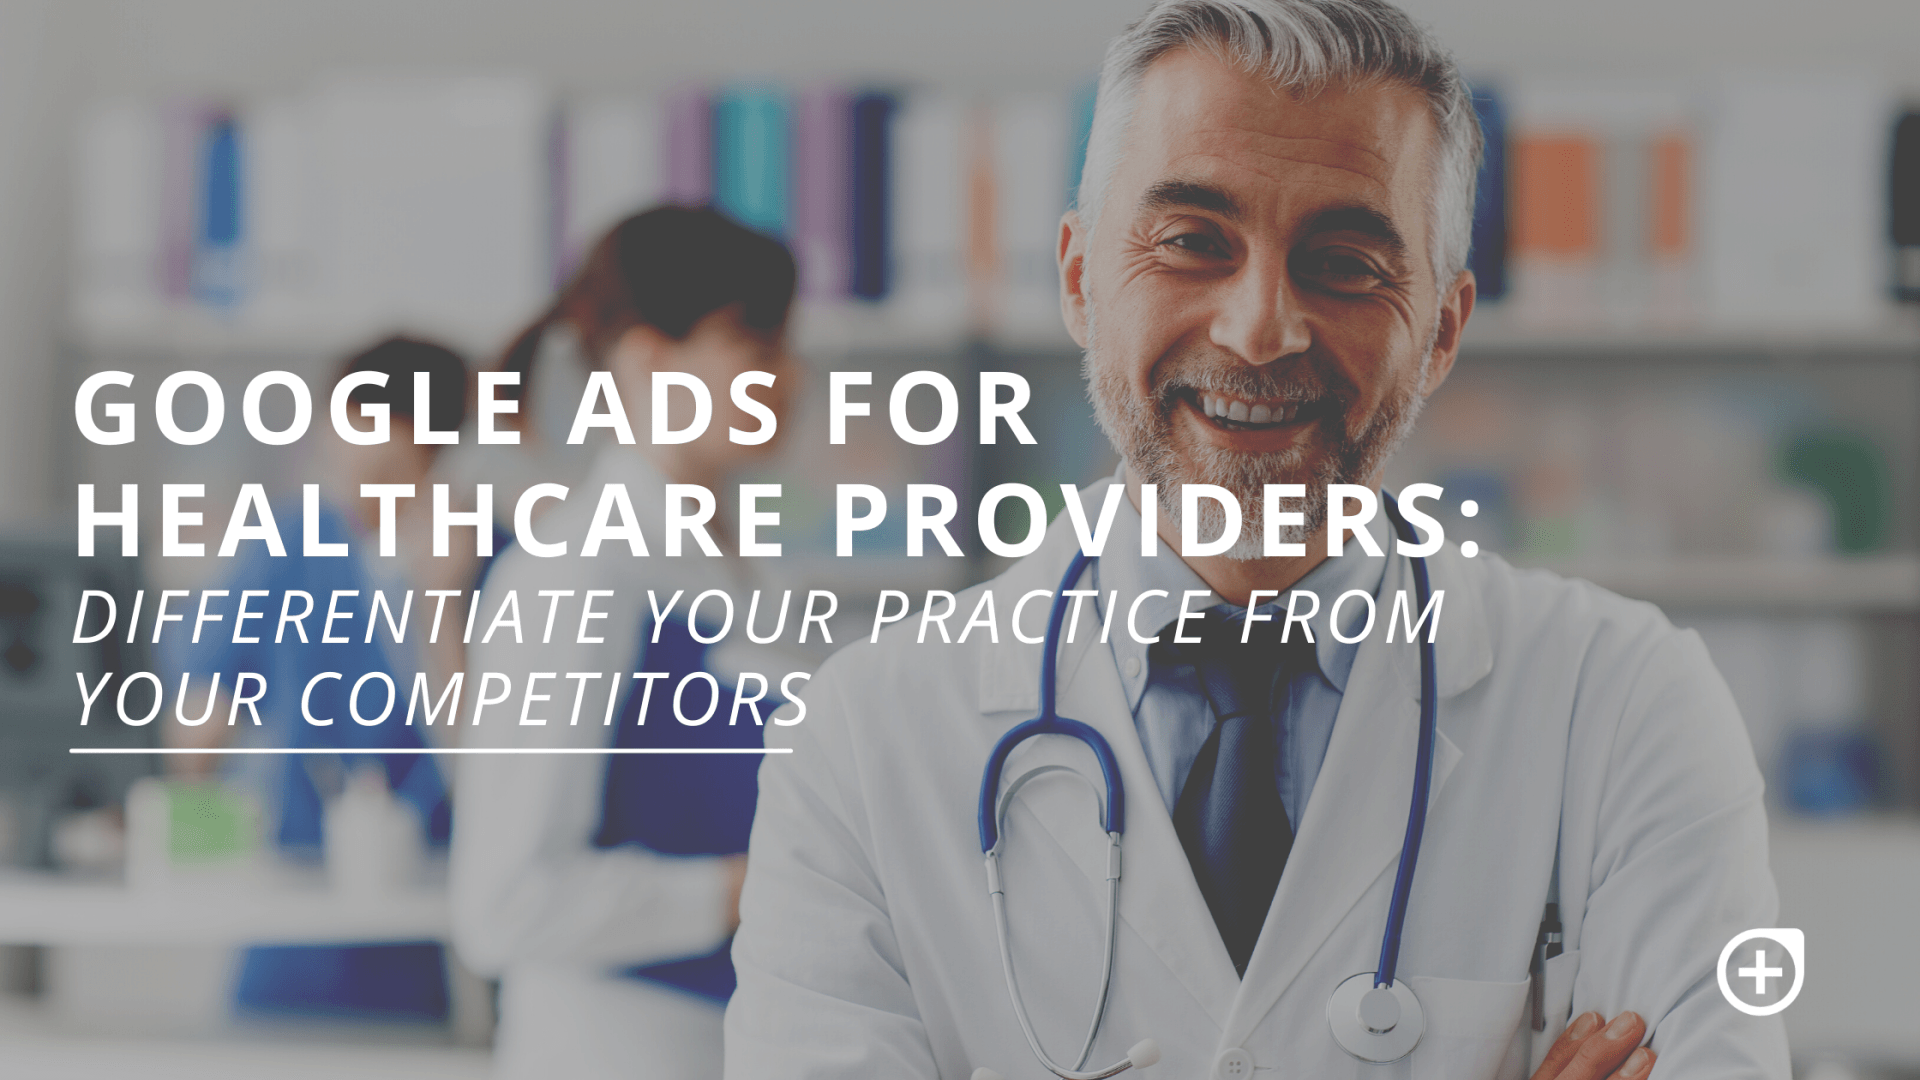 Google Ads for healthcare providers